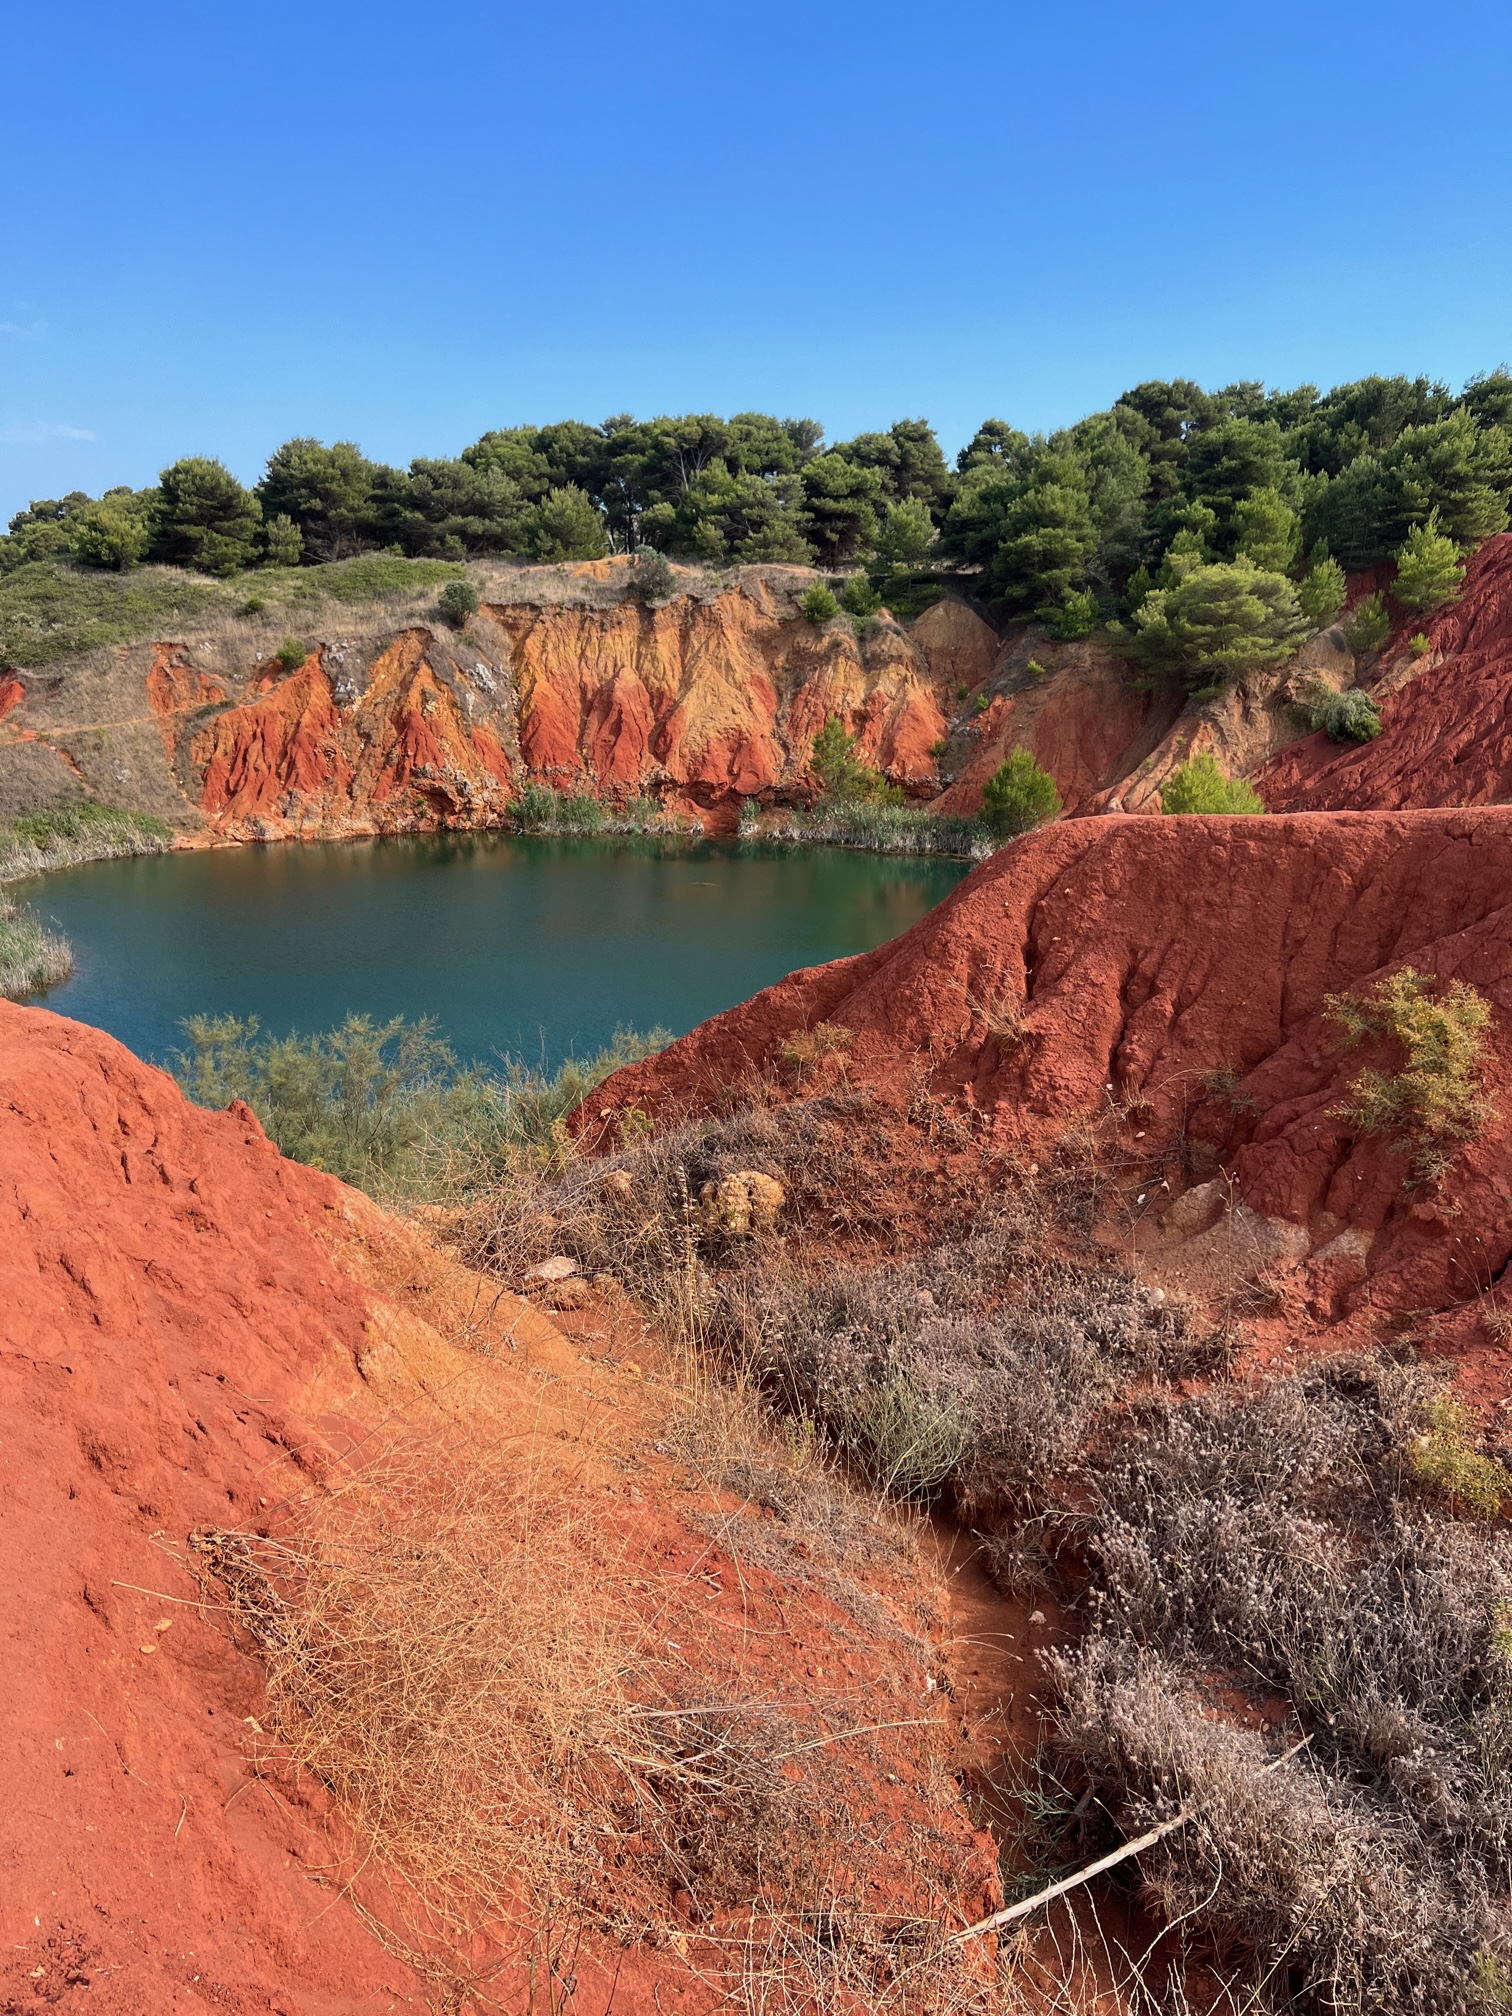 La cava di bauxite, Otranto’s bauxite quarry by the Big Gay Podcast from Puglia and the Puglia Guys | gay Puglia and gay Ostuni guide for Italy’s best gay beach and gay travel | Puglia, Italy, gay travel, gaycation